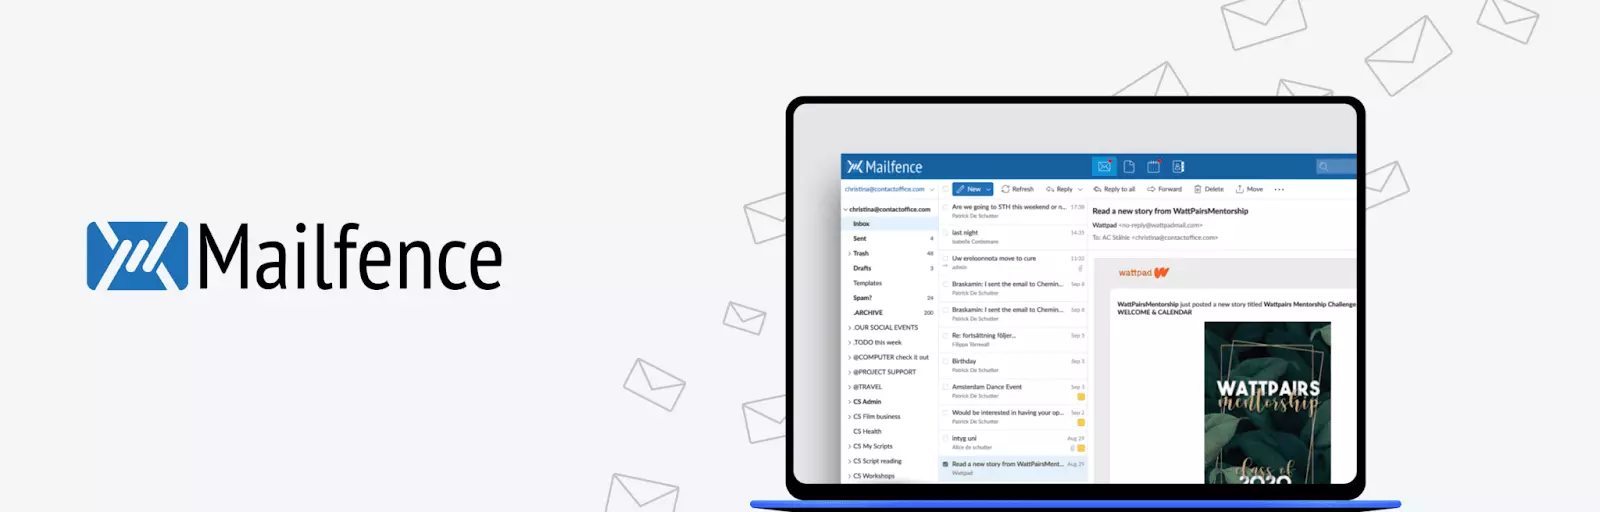 Mailfence Email Client